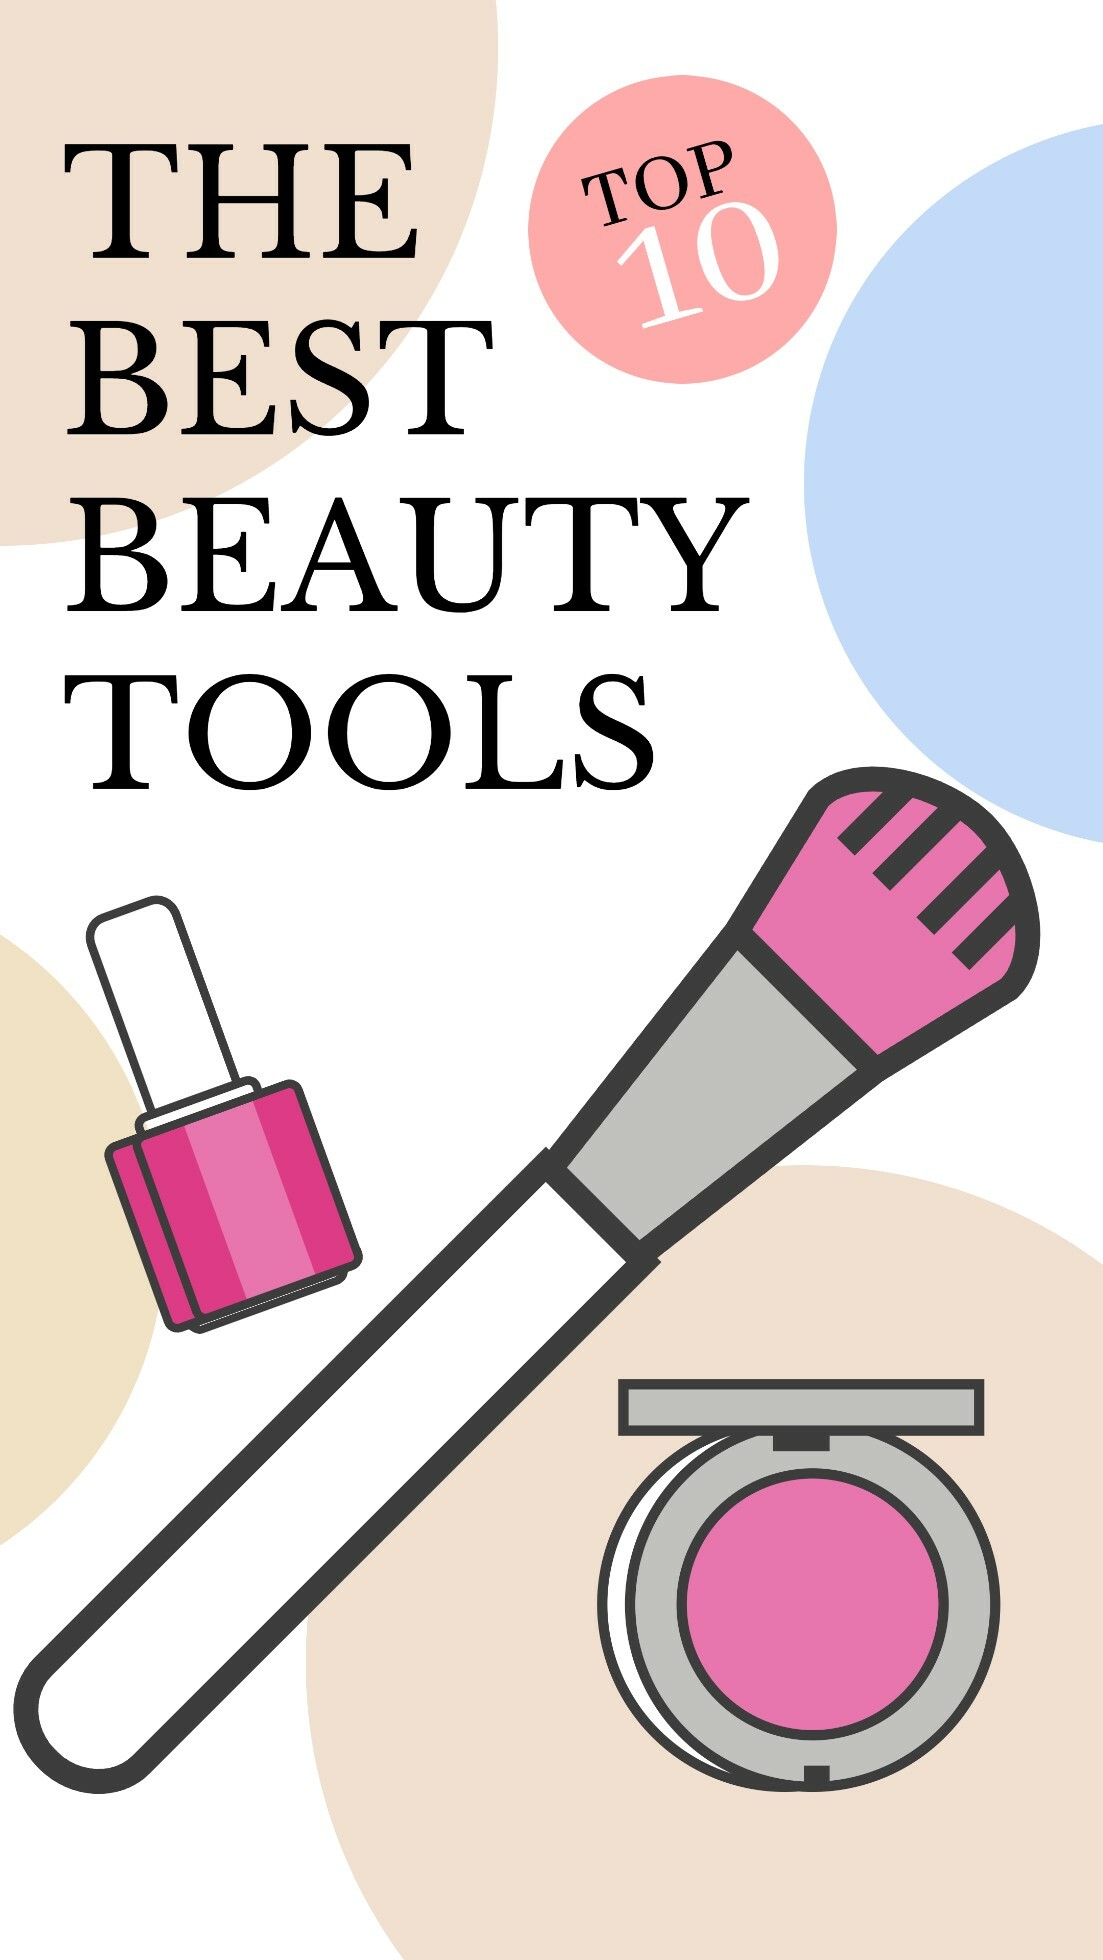 Best beauty tools template